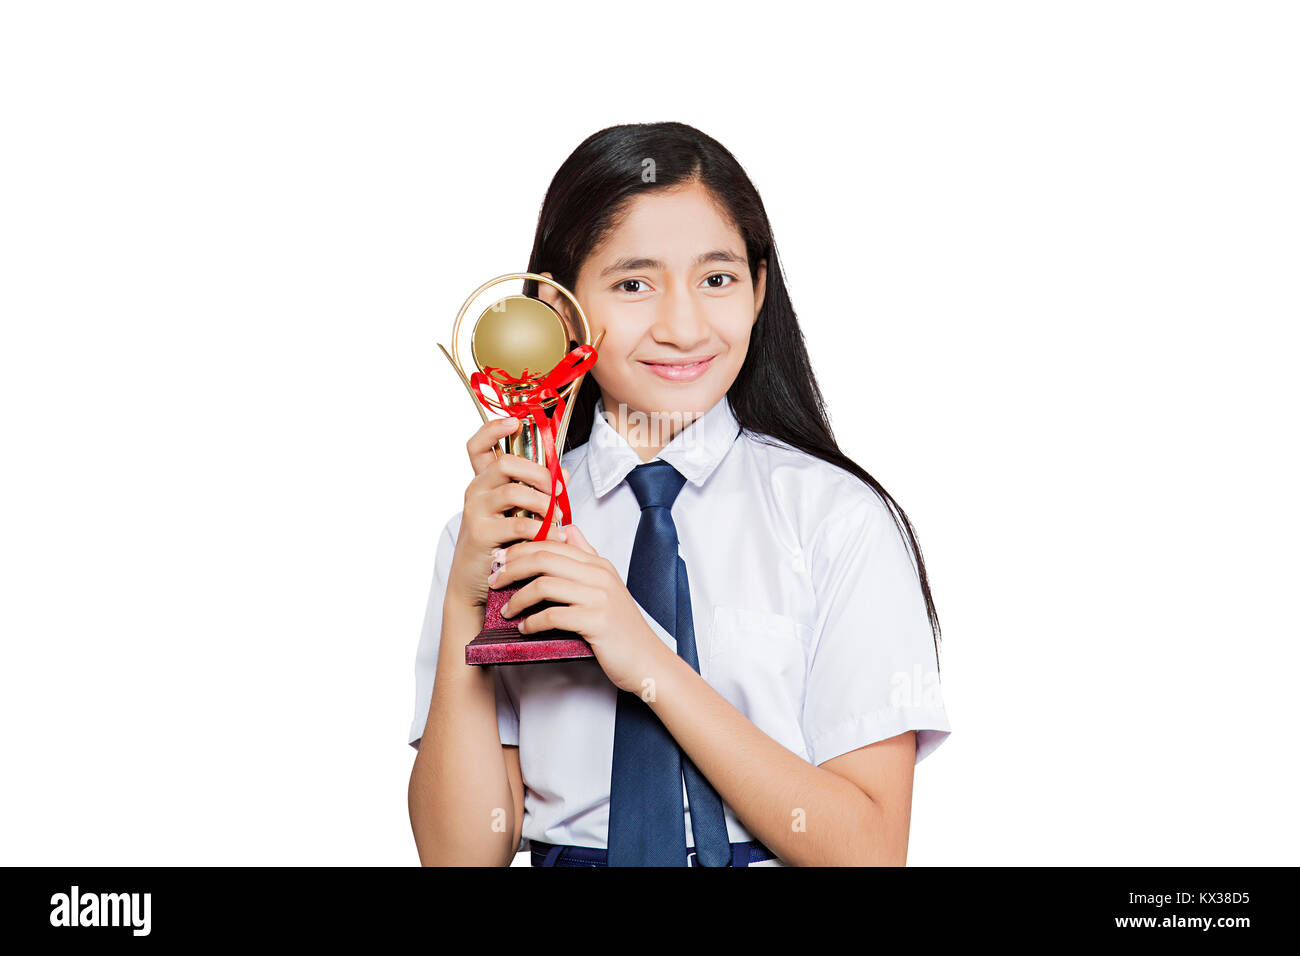 1 Indian Teenager School Girl Student Showing Victory Trophy Success Stock Photo